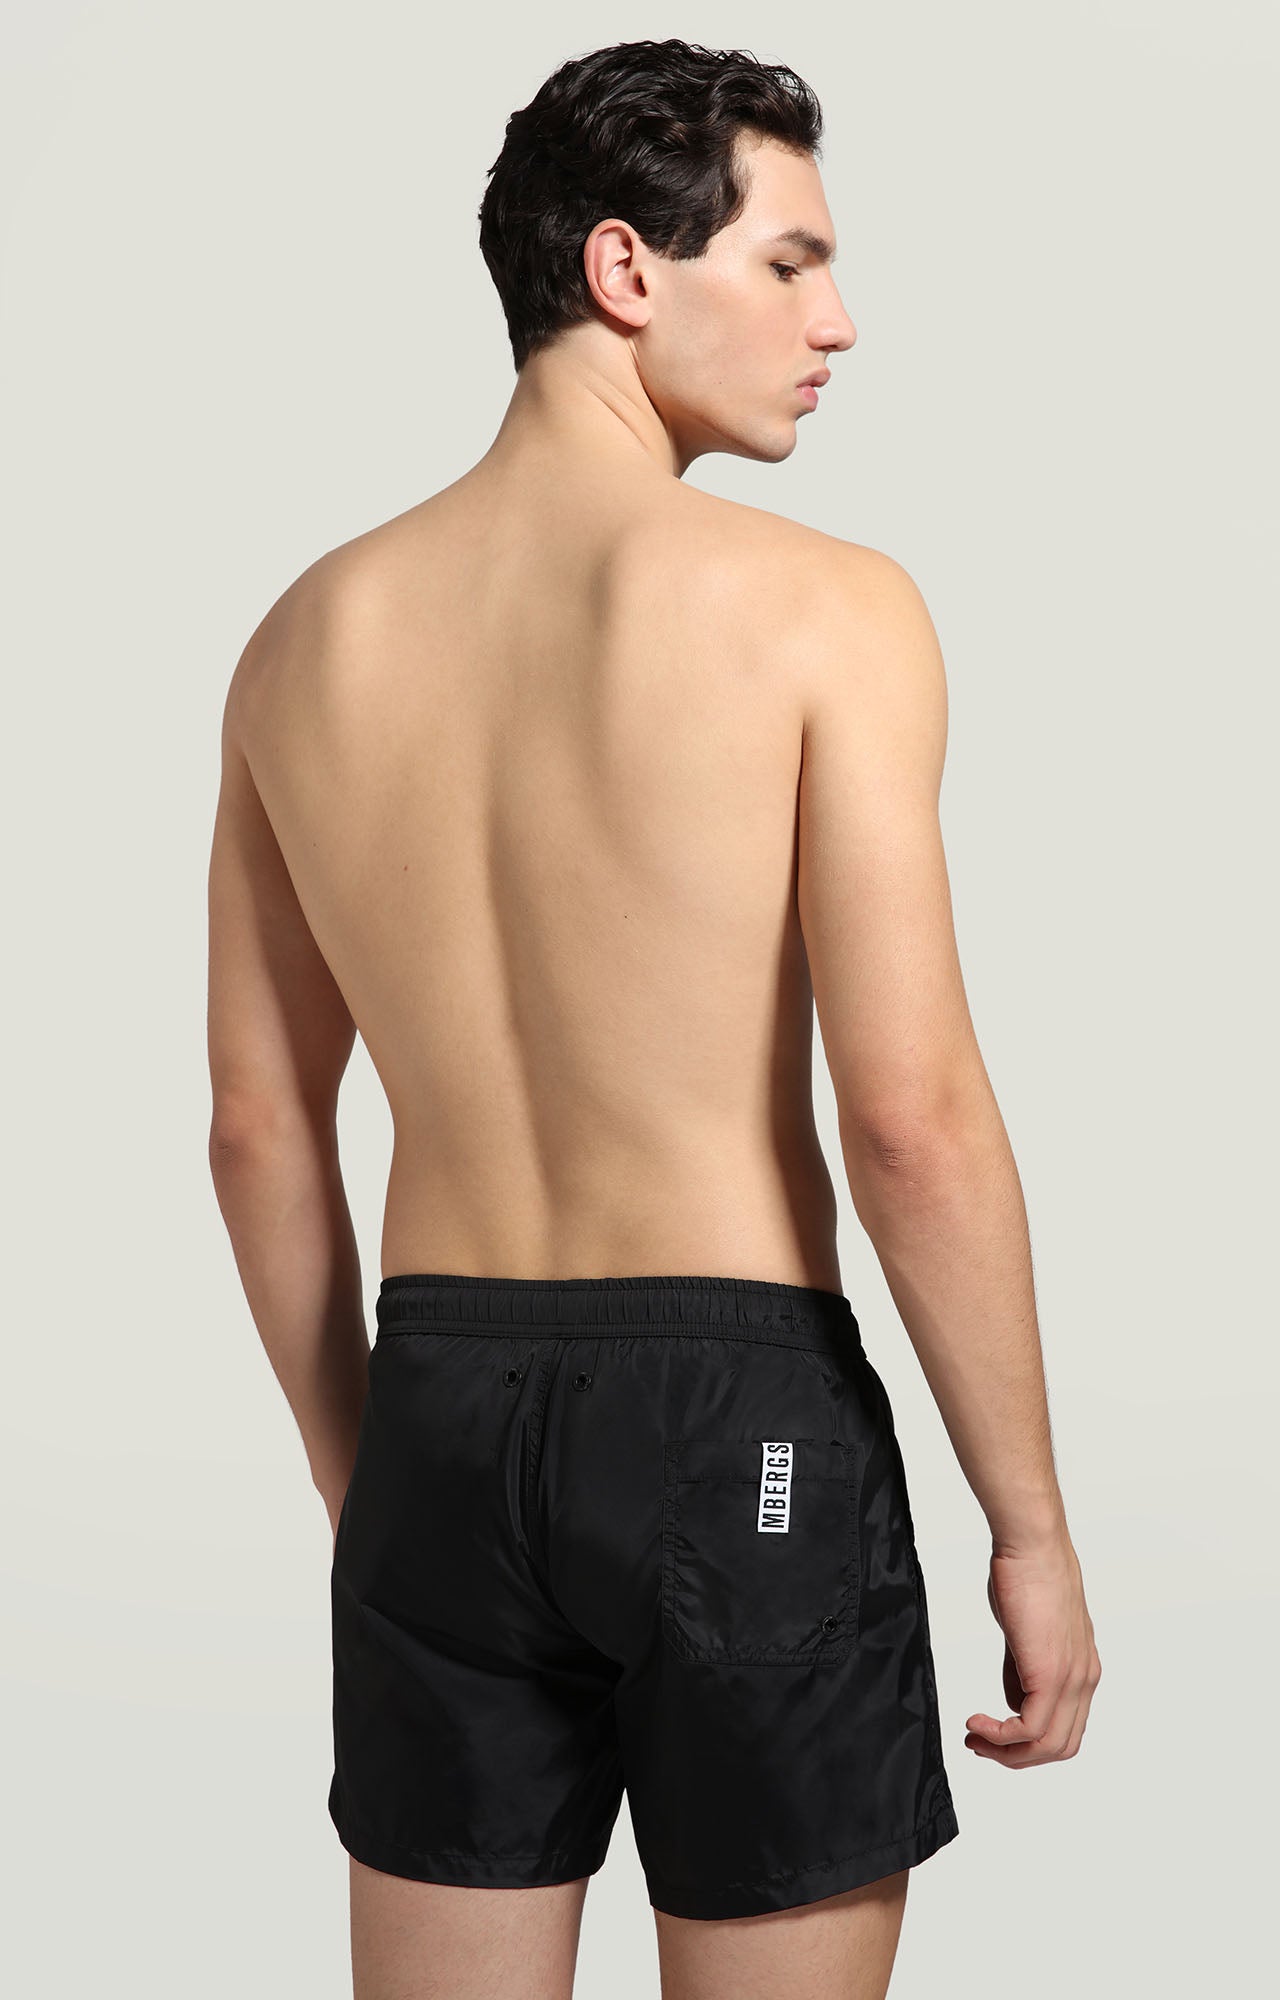 Men's boardshorts with layered detail